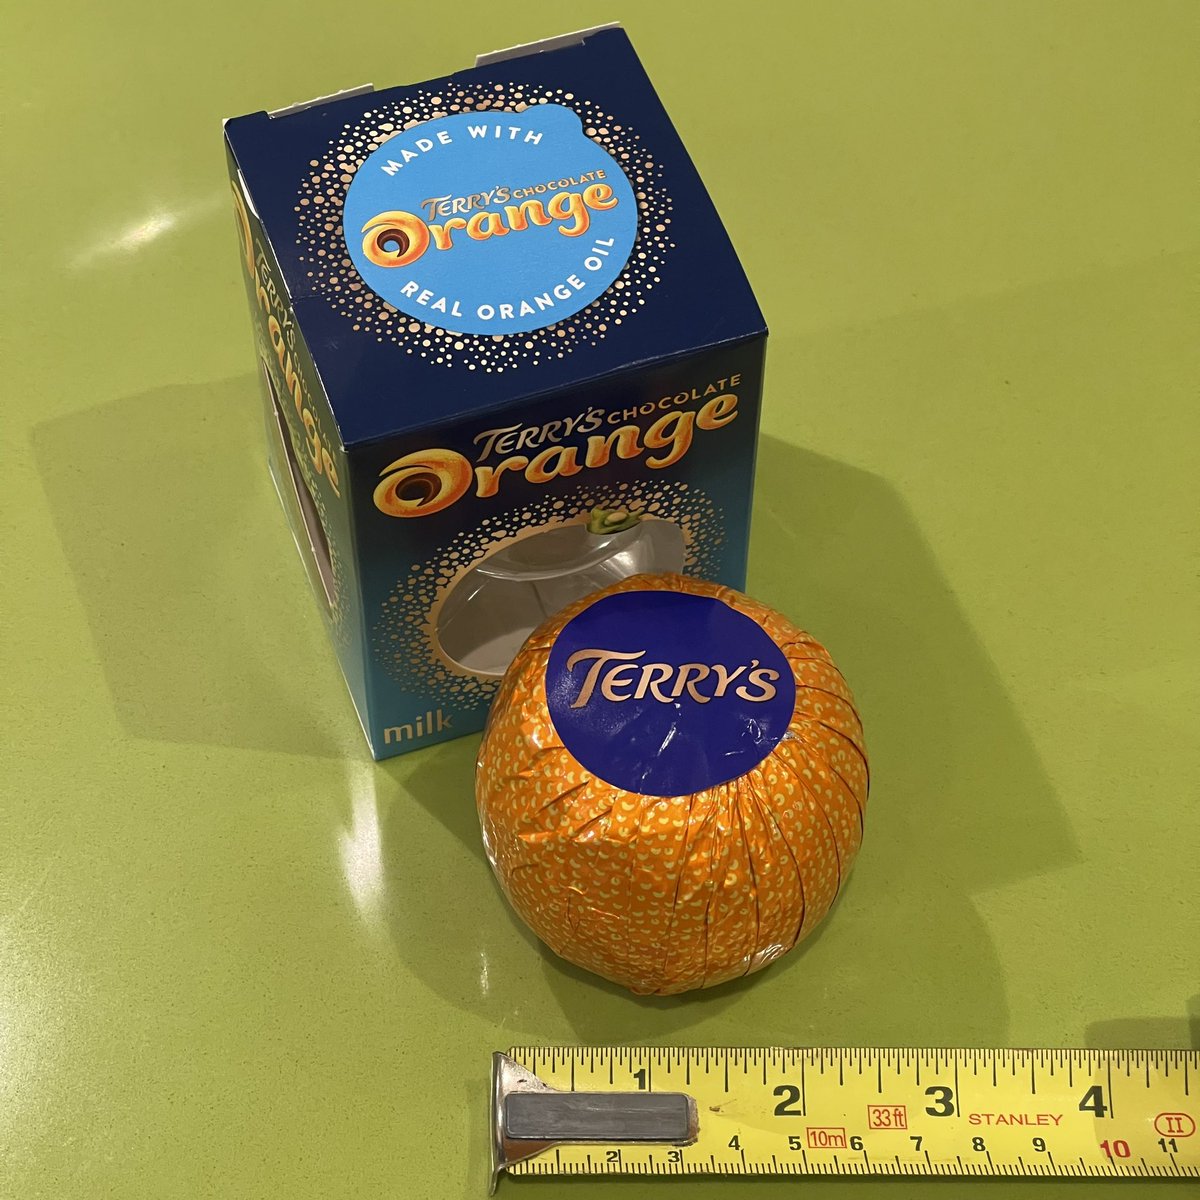 Given the size they are now, perhaps it would be more accurate to call it a Terry’s Chocolate Satsuma?

#christmas #terryschocolateorange #shrinkflation #chocolate